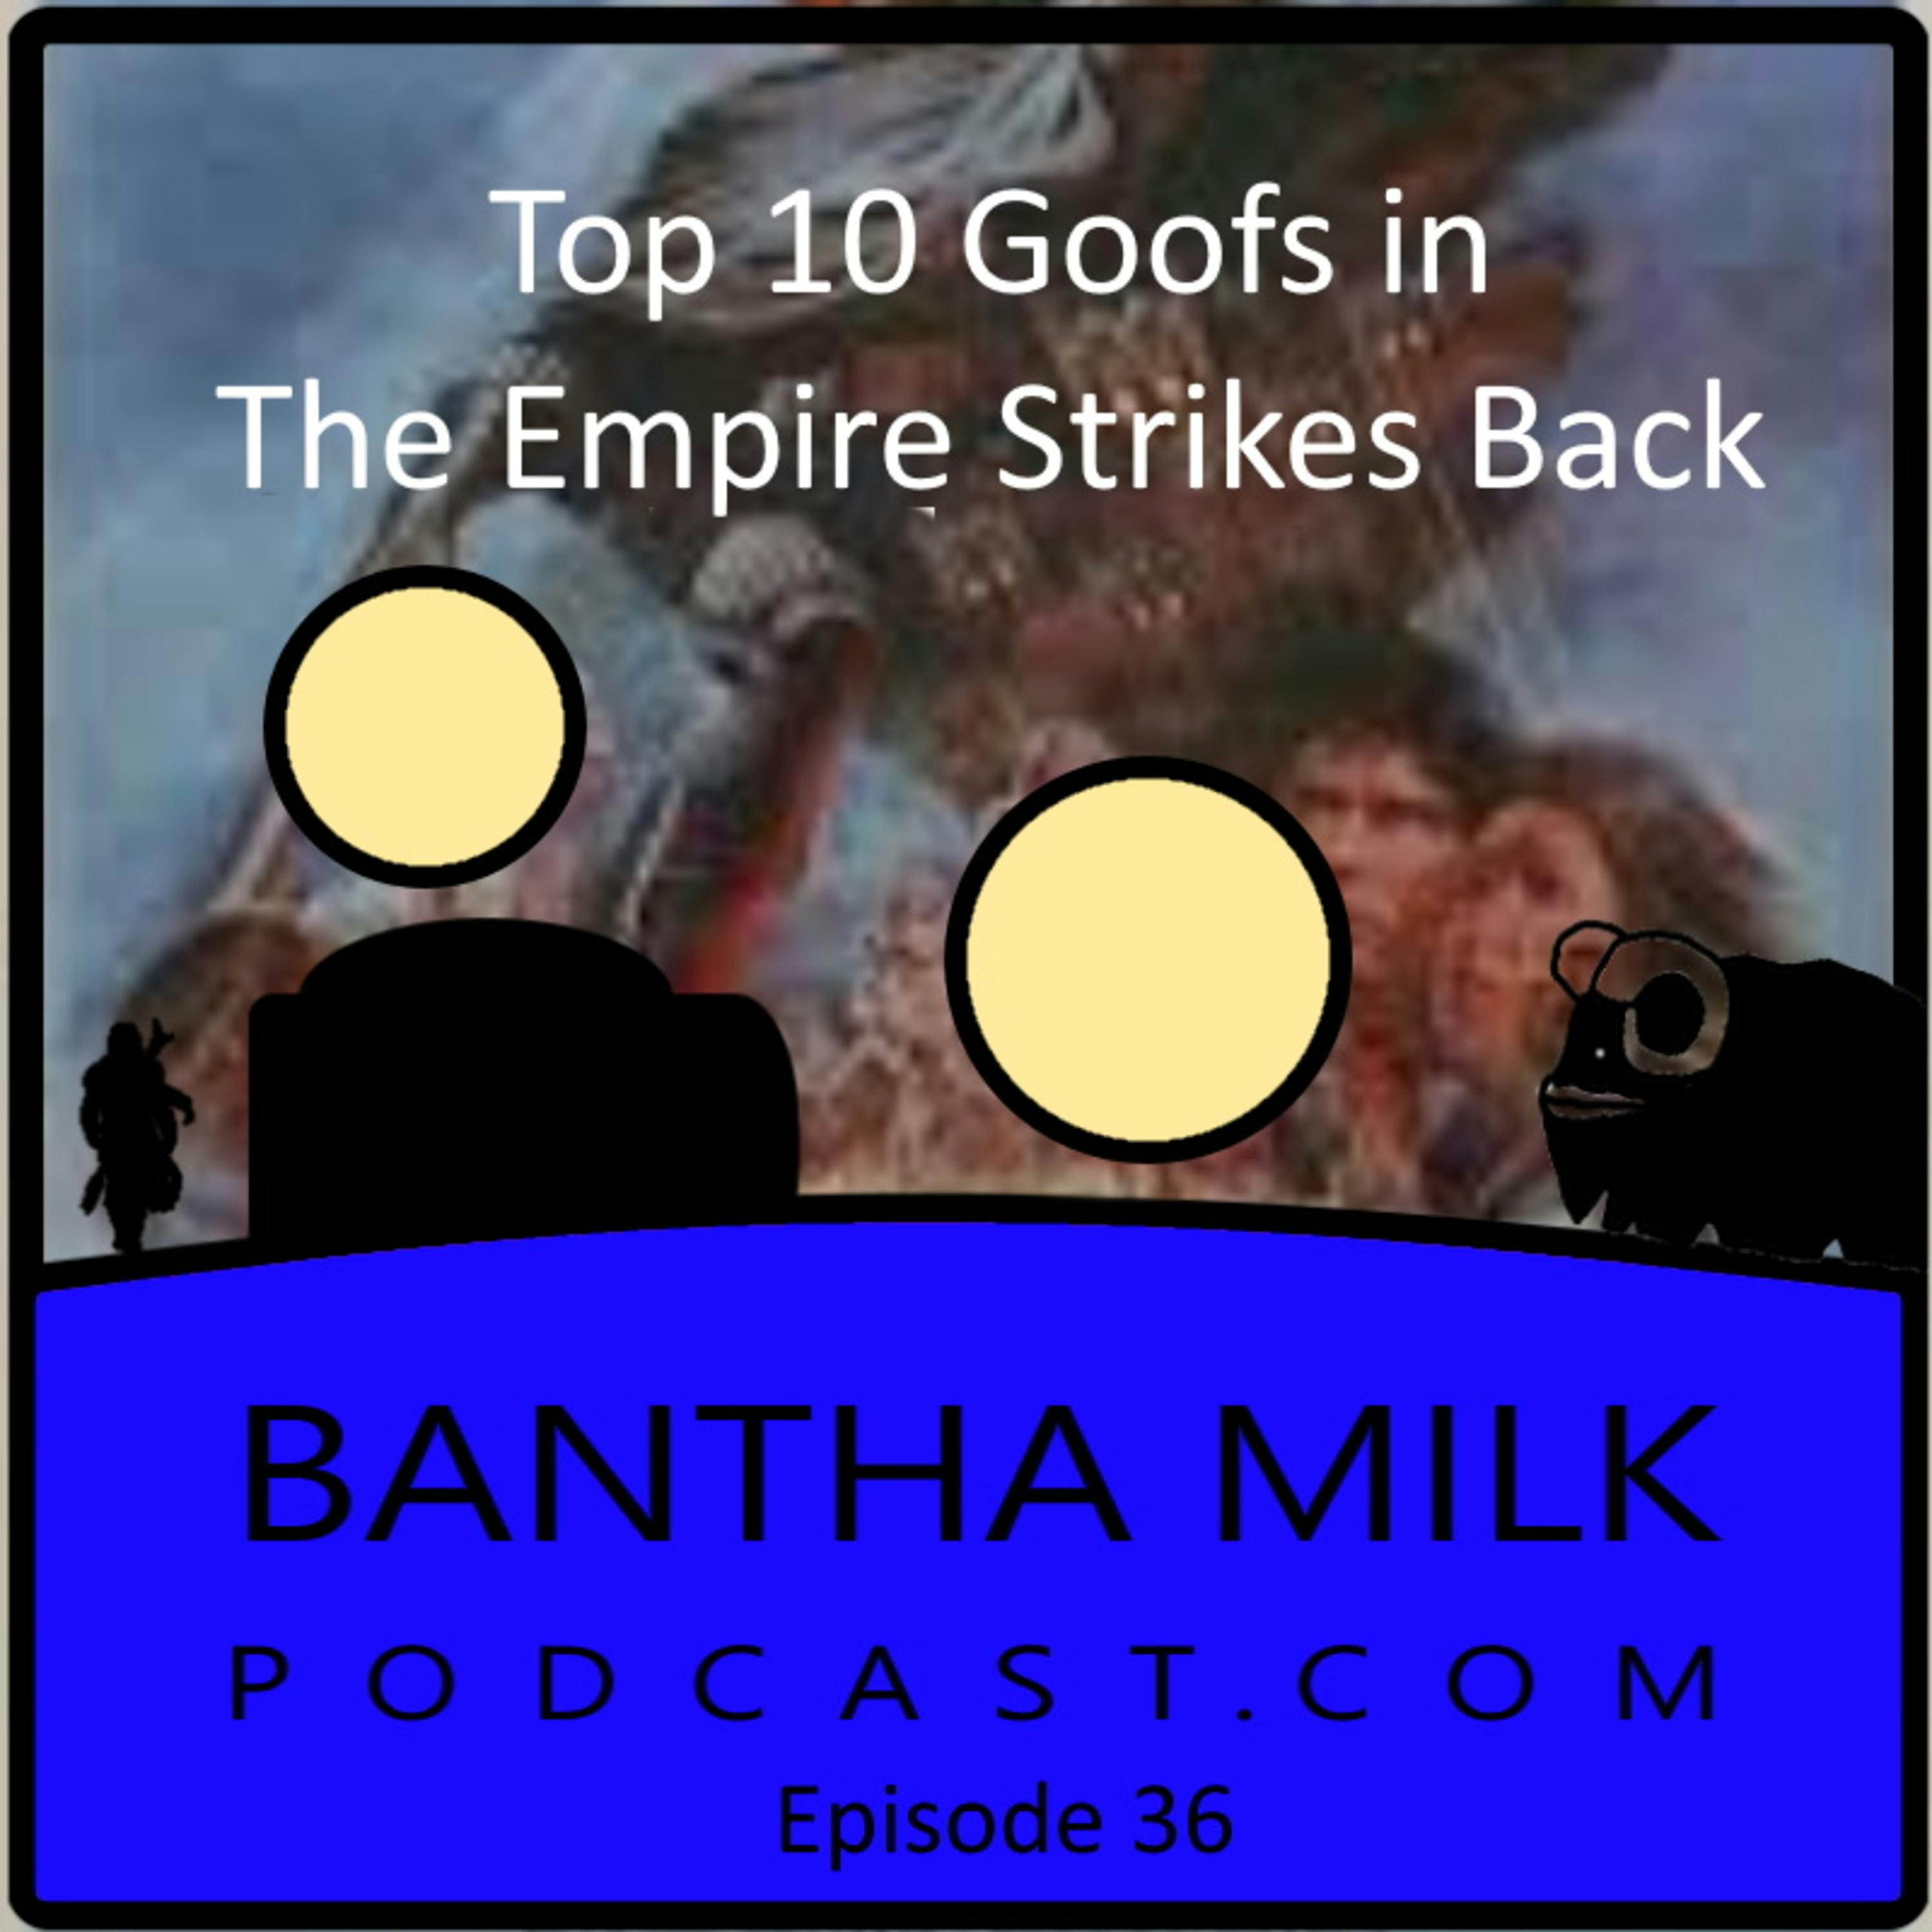 Top 10 Goofs in Empire Strikes Back